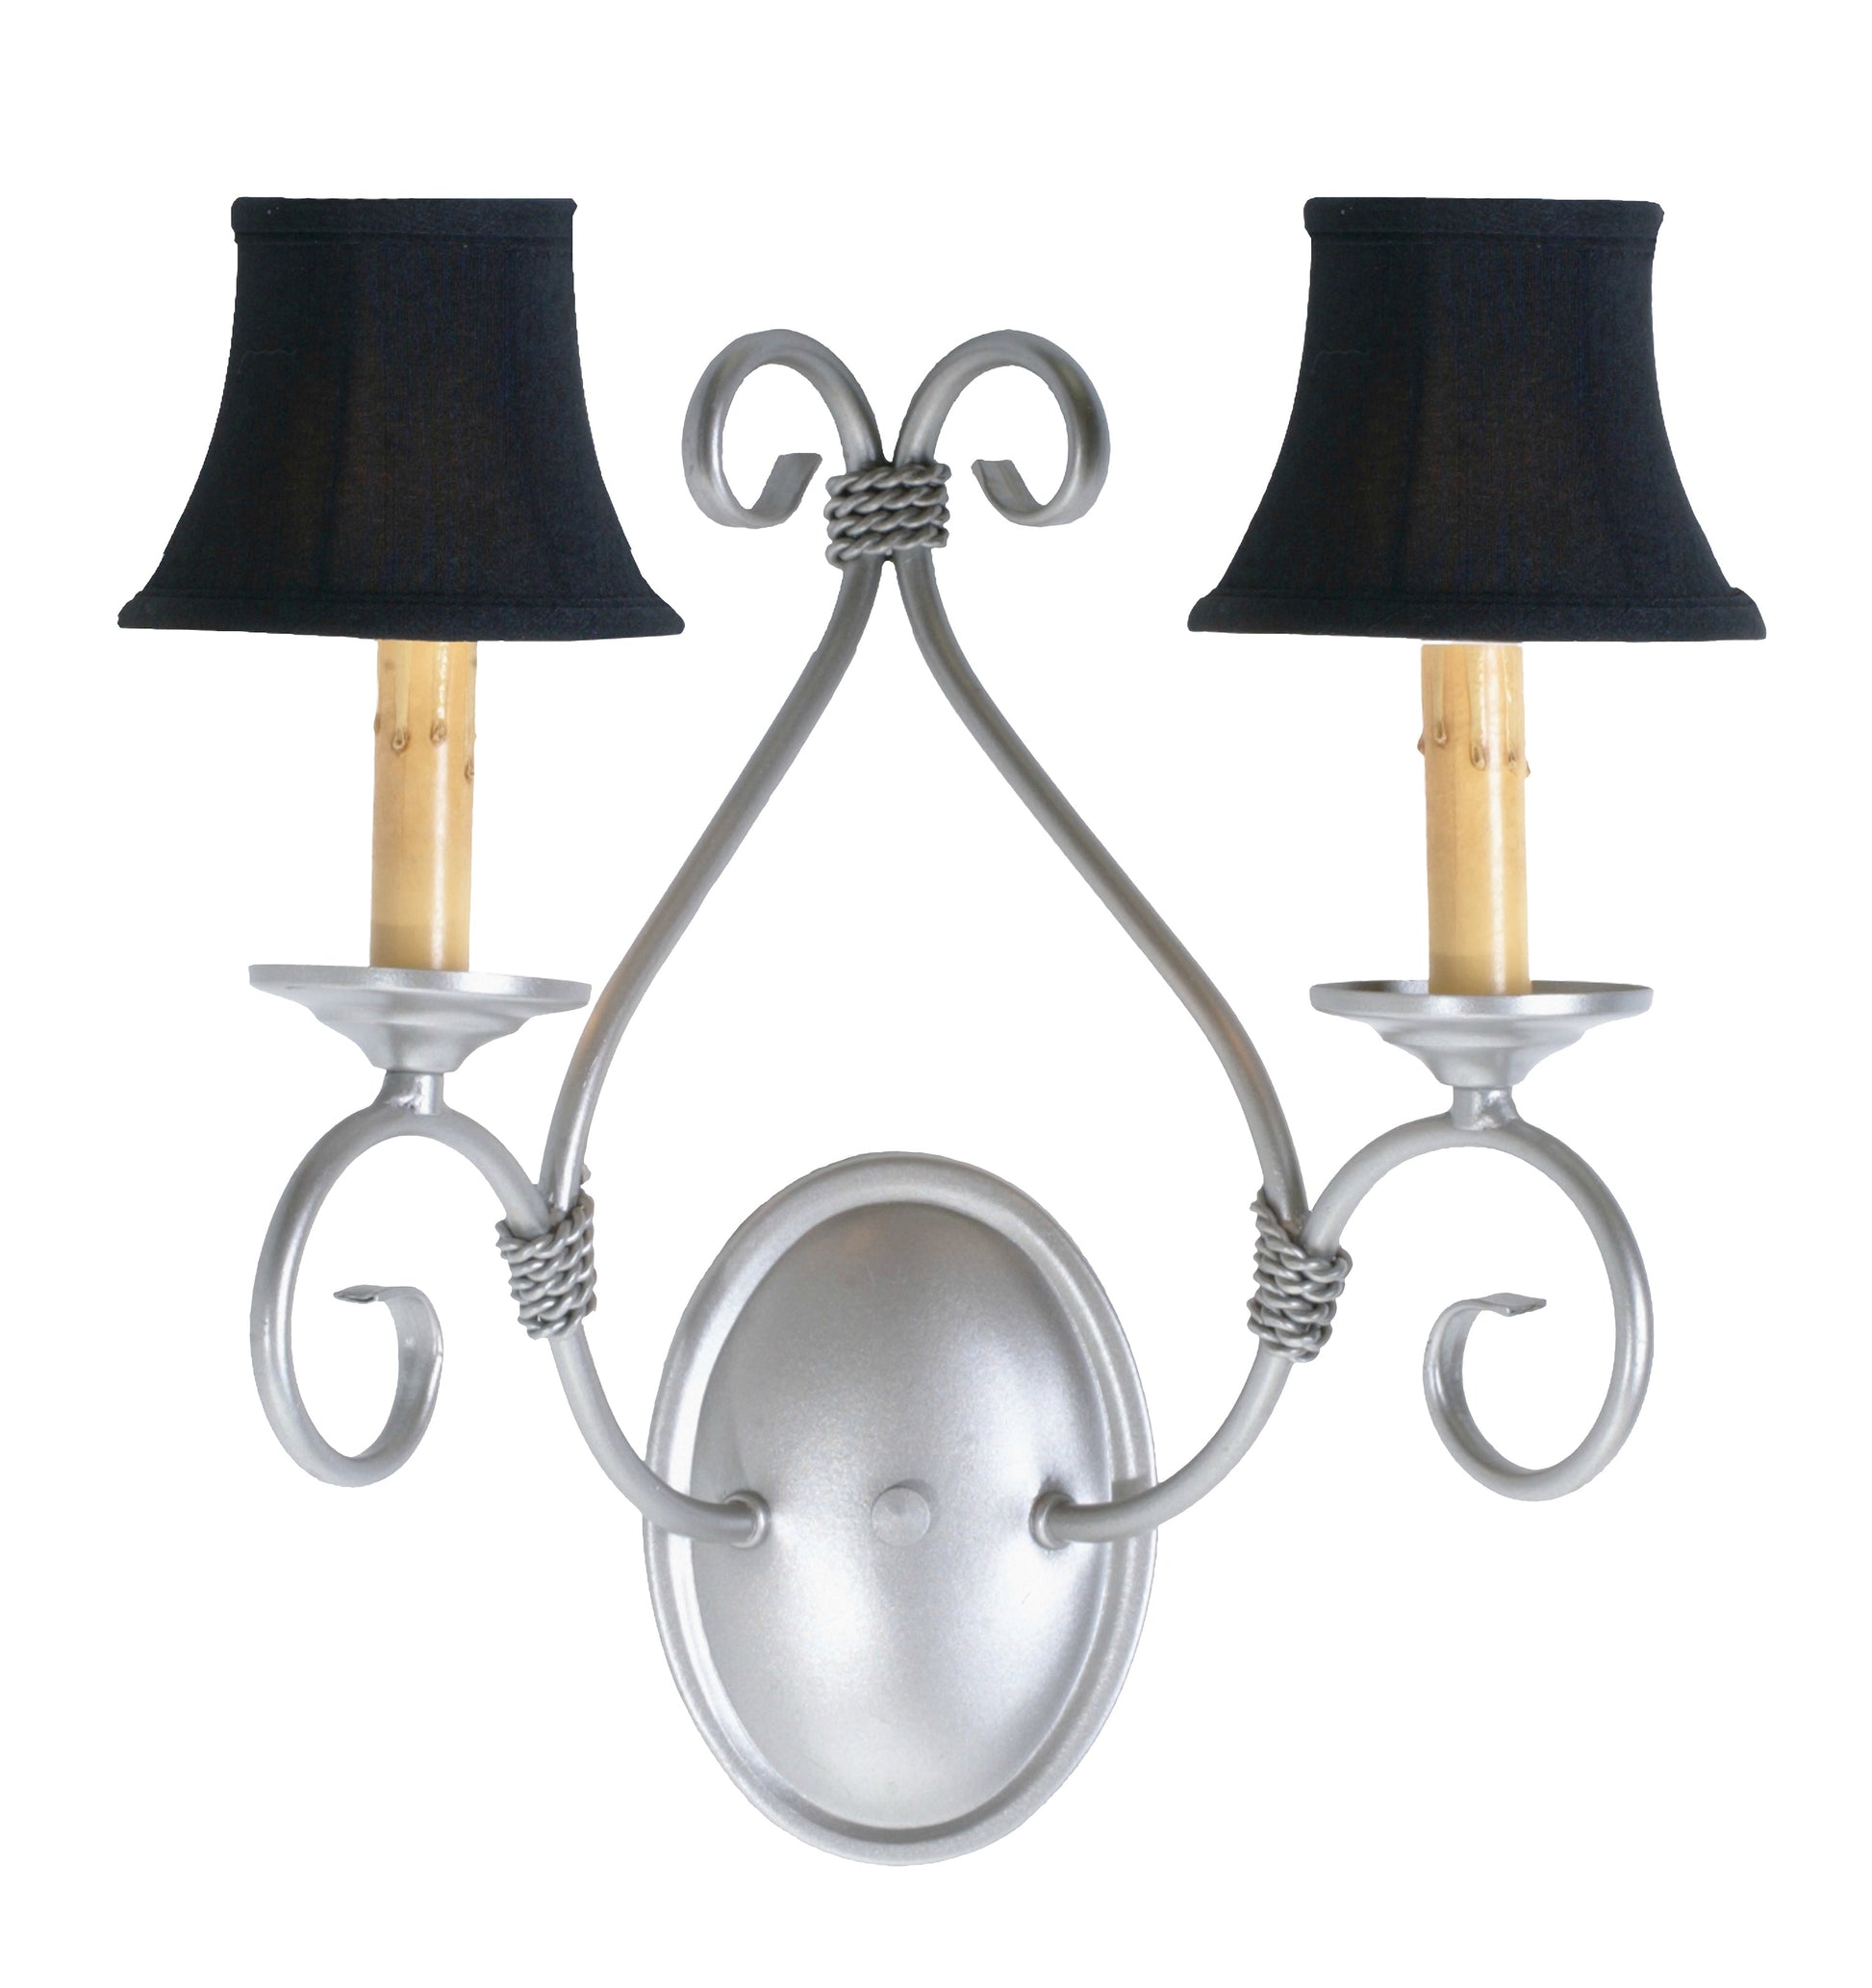 14" Olivia 2-Light Wall Sconce by 2nd Ave Lighting